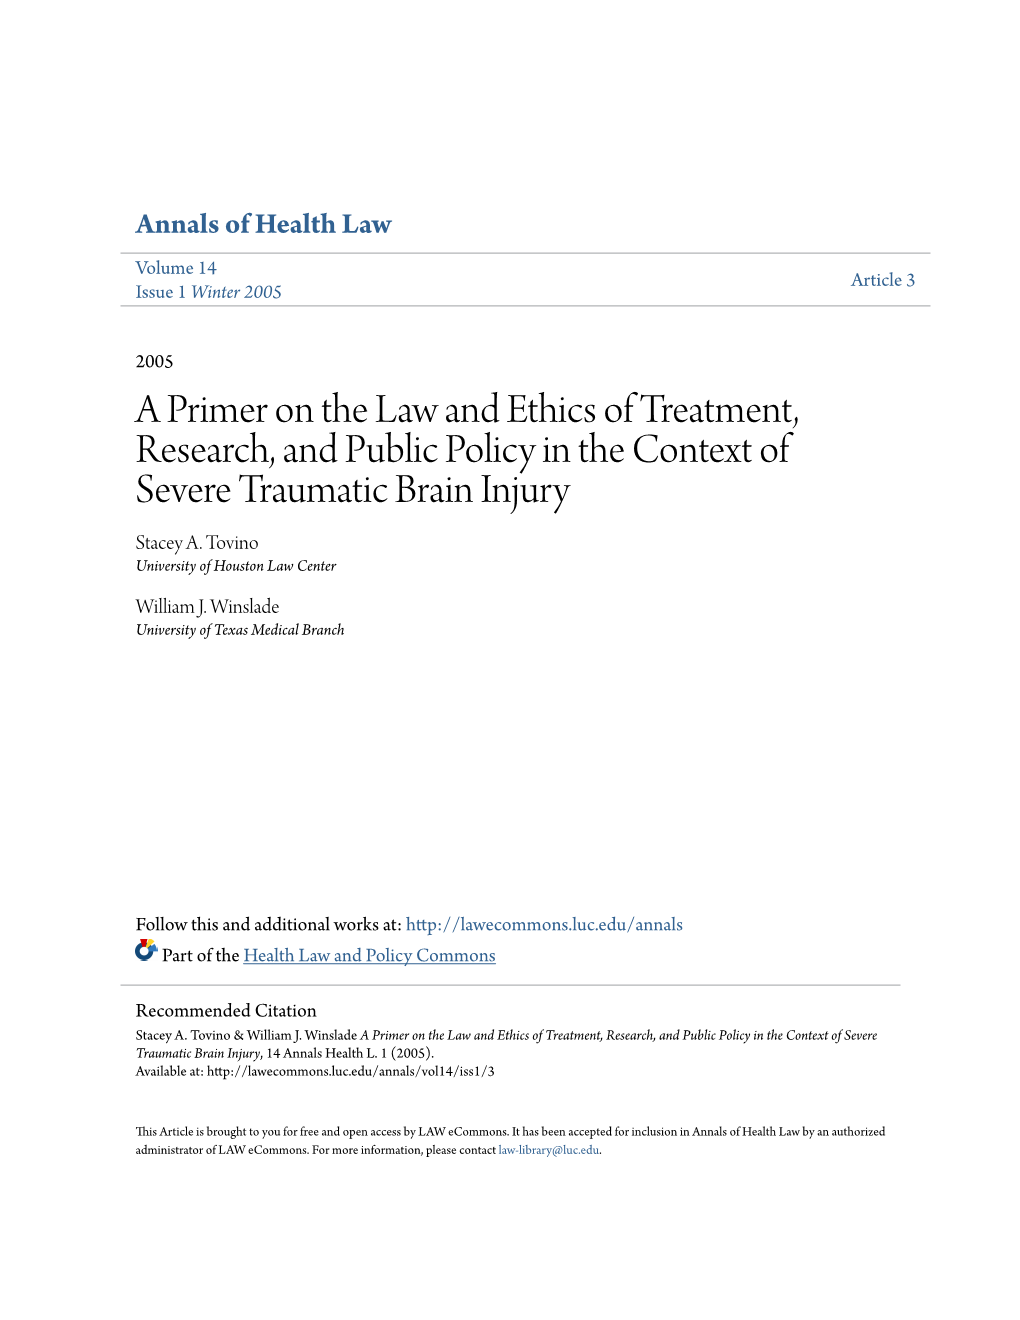 A Primer on the Law and Ethics of Treatment, Research, and Public Policy in the Context of Severe Traumatic Brain Injury Stacey A